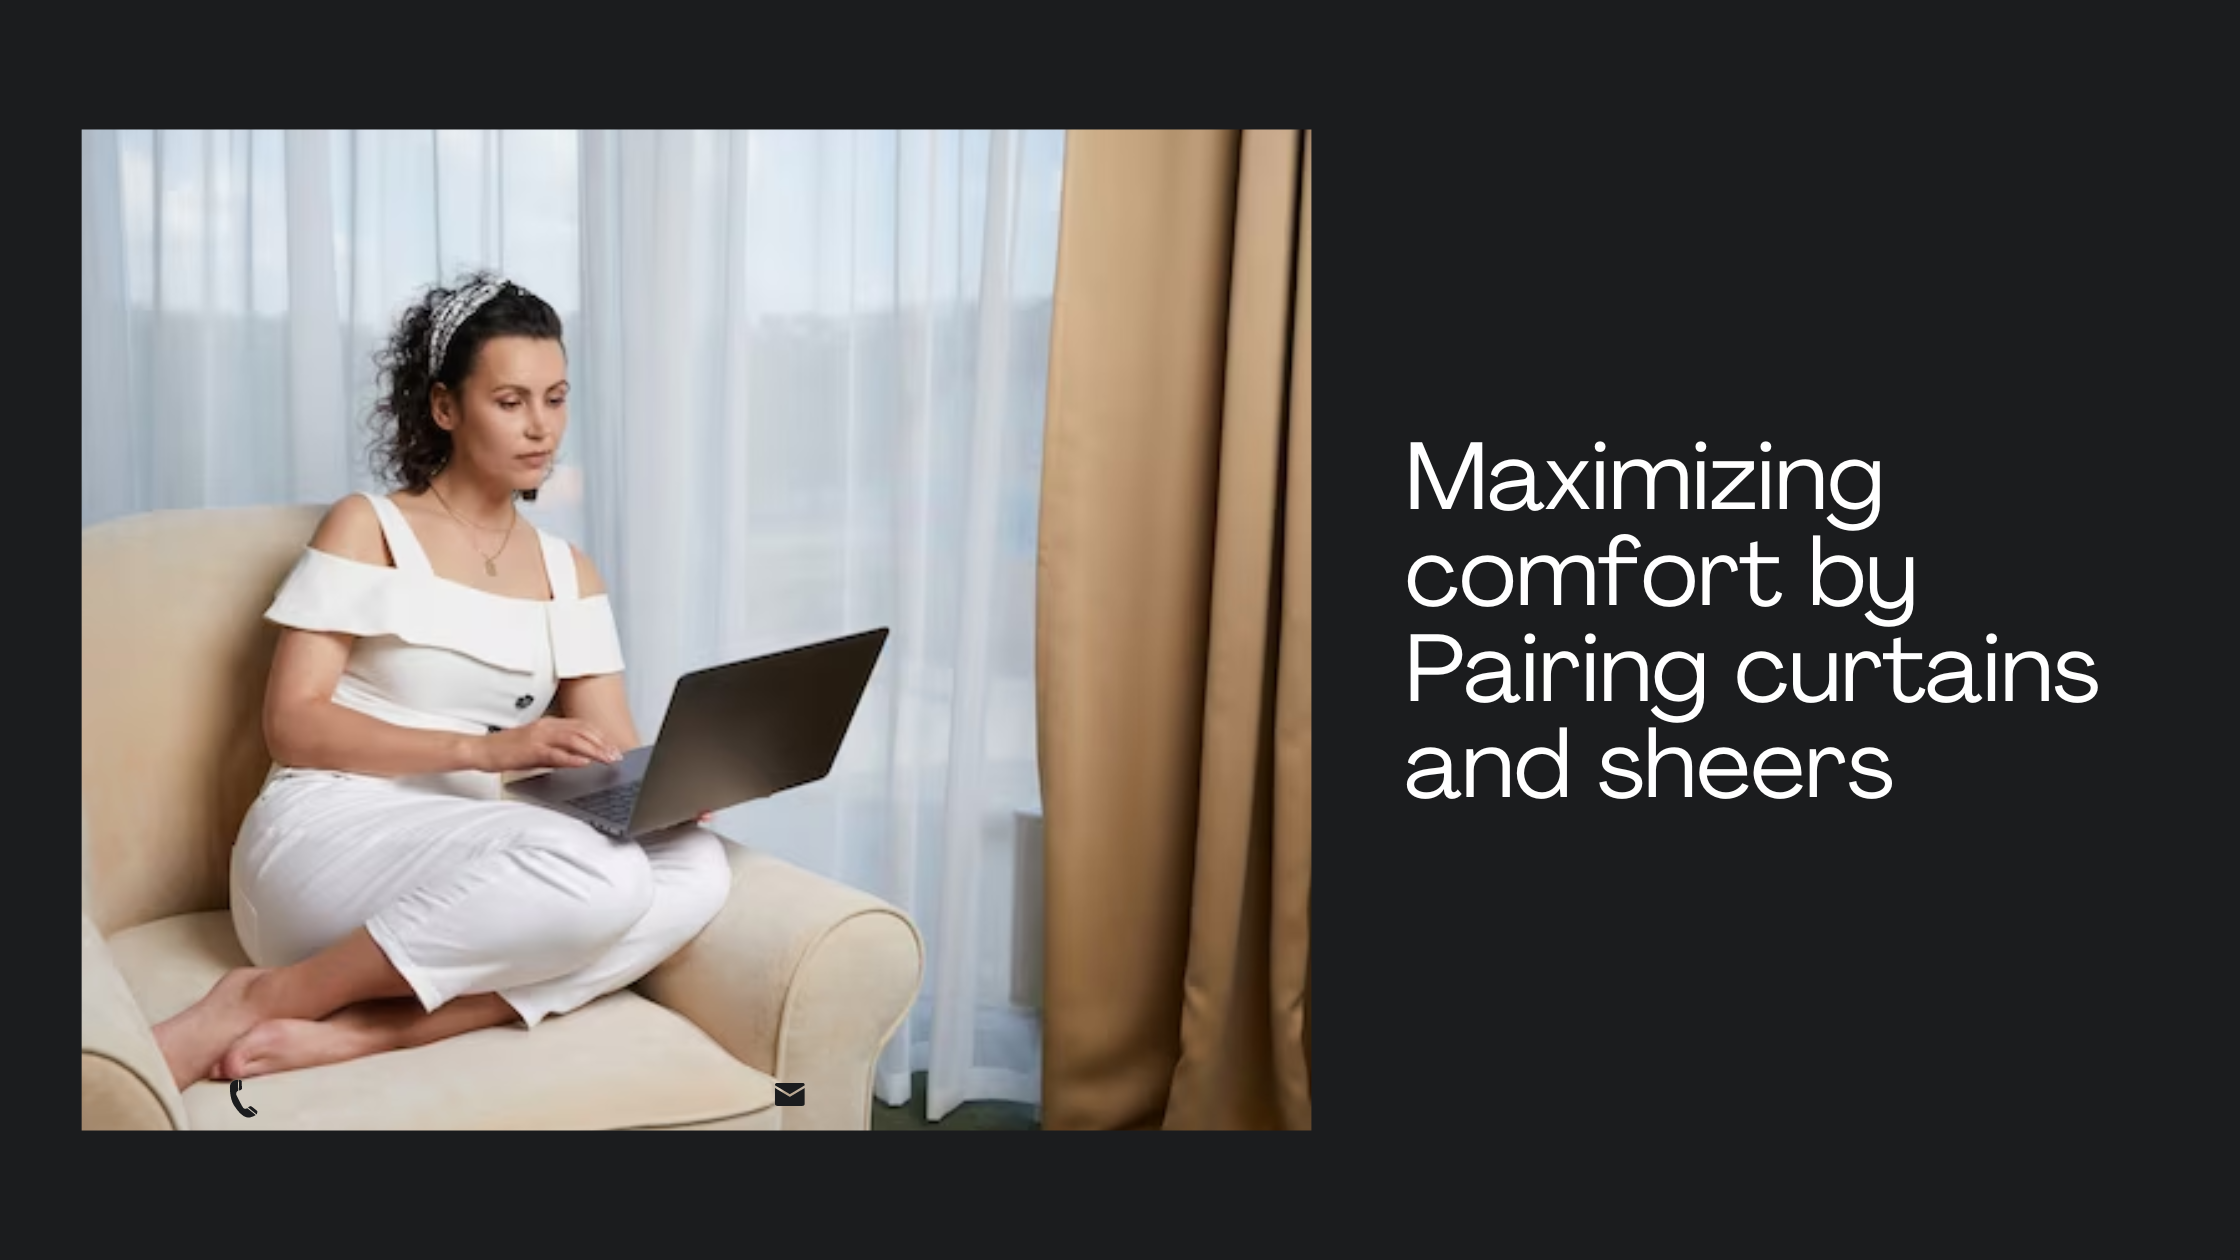 How Should You Pair Curtains and Sheers To Derive Maximum Comfort?